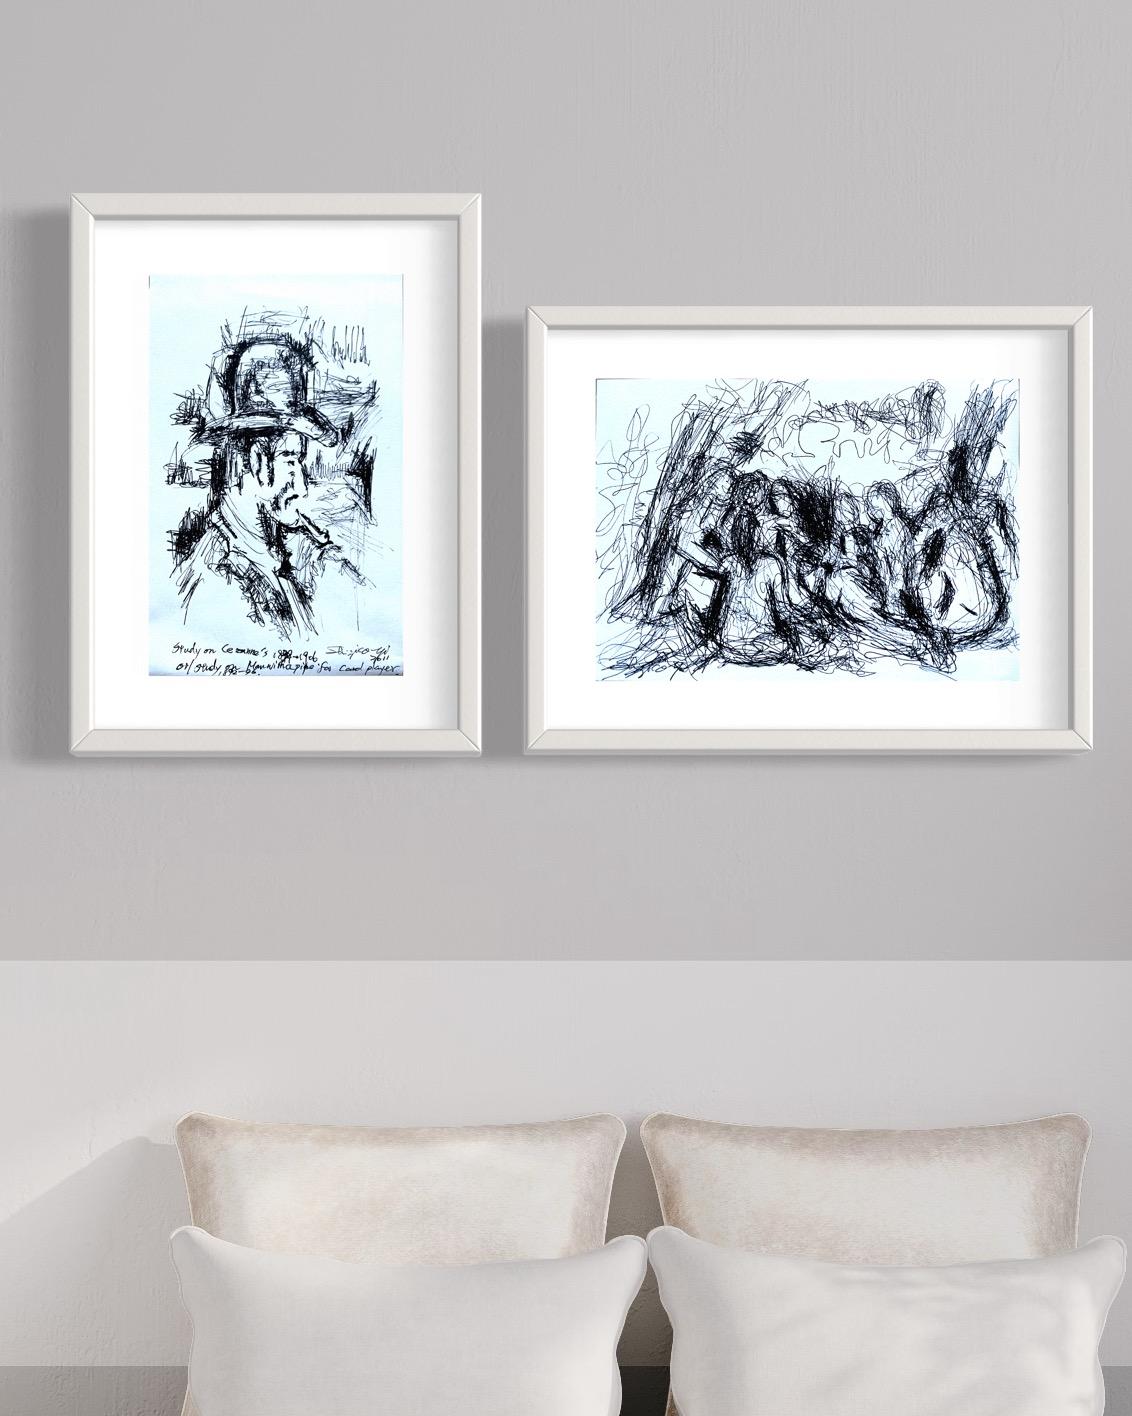 Original-Meeting Cezanne-Studies of Movement and Form-UK Artist-Set of 2 drawing For Sale 17